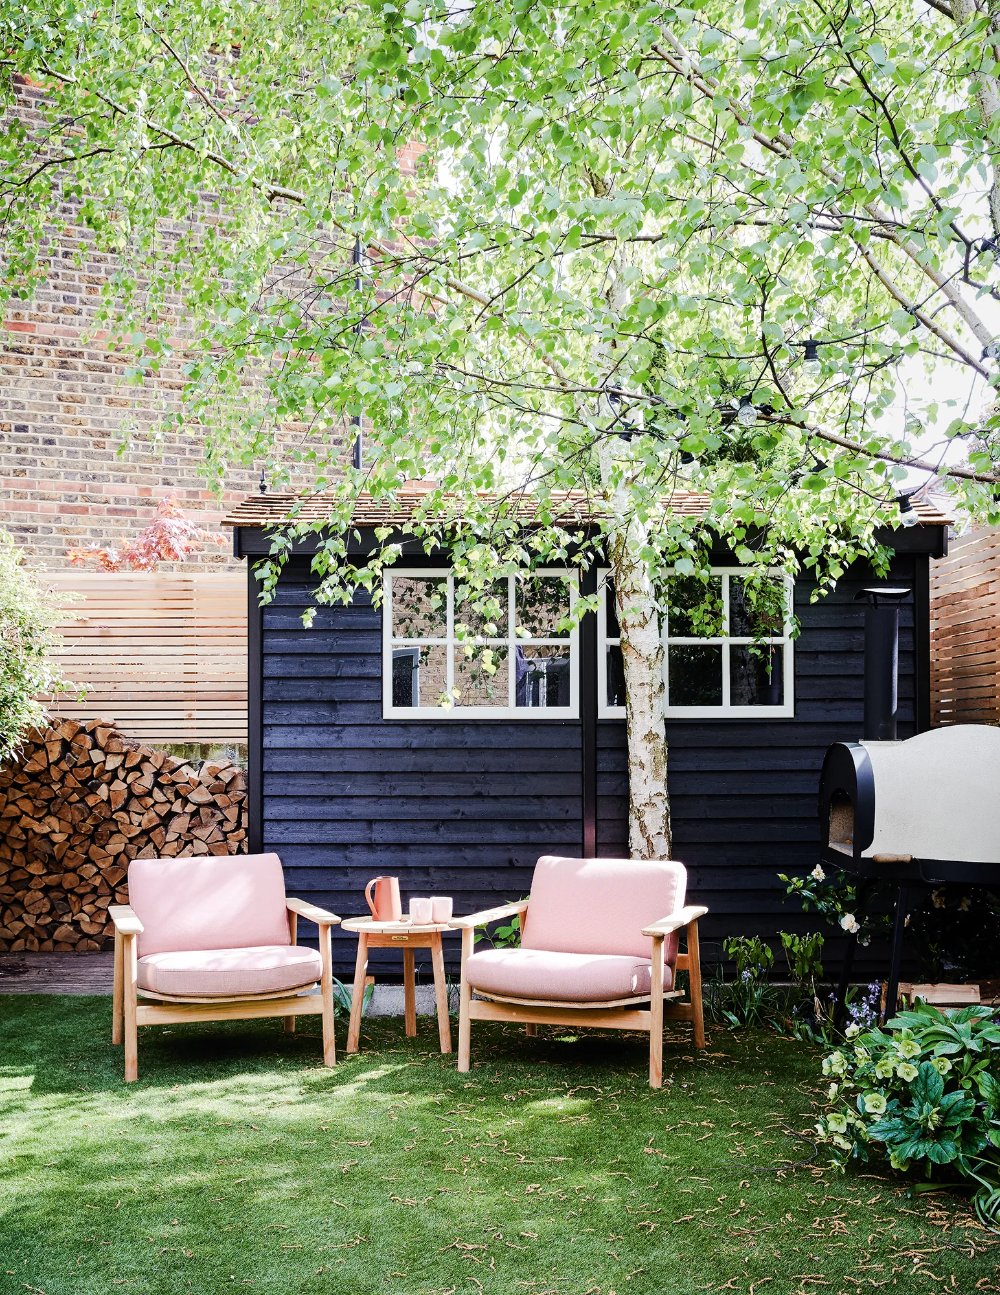 The Beauty of Wooden Sheds: A Rustic Addition to Your Outdoor Space